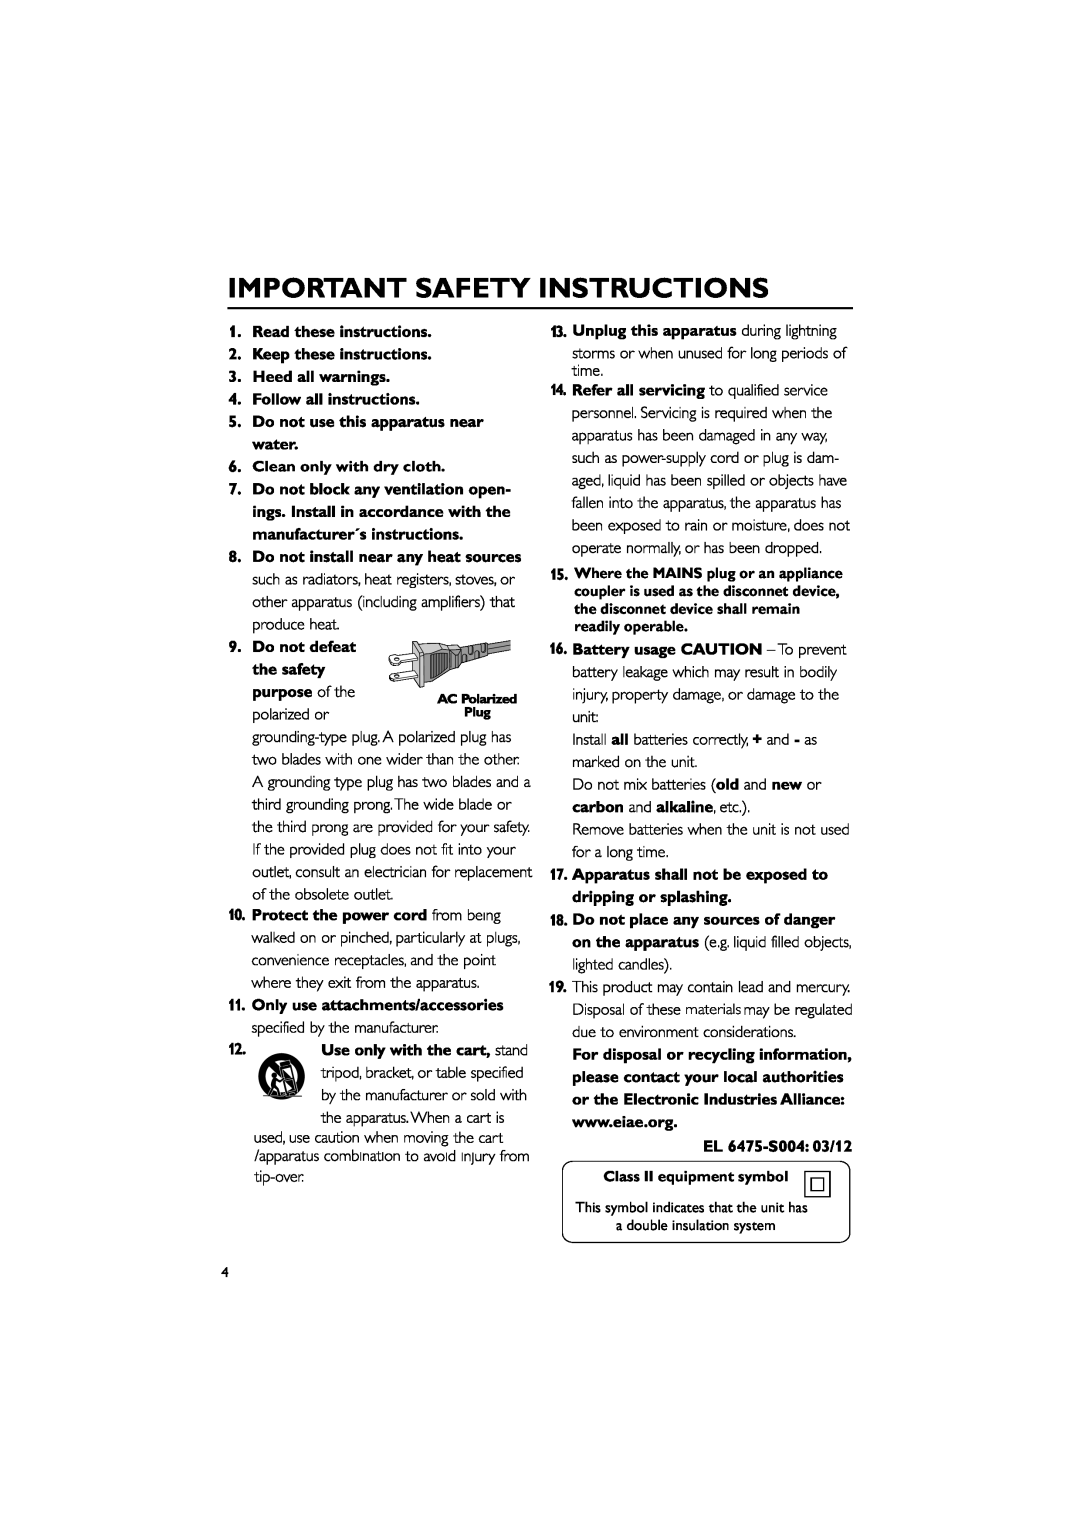 Philips DC912 quick start Important Safety Instructions, Clean only with dry cloth, Class II equipment symbol 